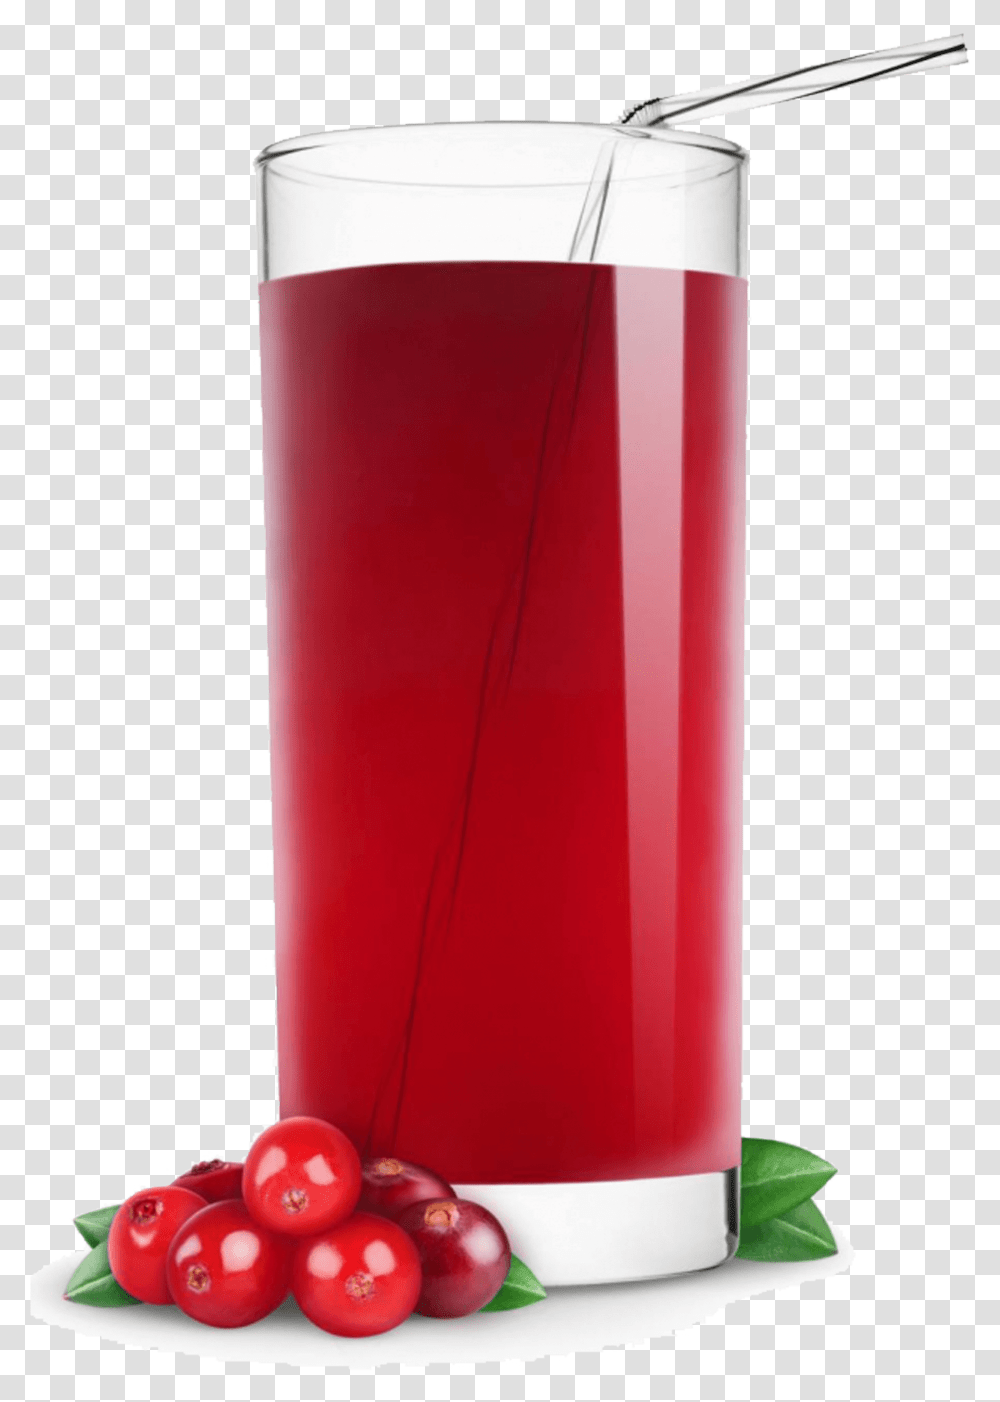 Download Honeymoon Cystitis Is A Condition In Which Woman Orange Apple Cranberry Juice, Bottle, Beverage, Drink, Cylinder Transparent Png